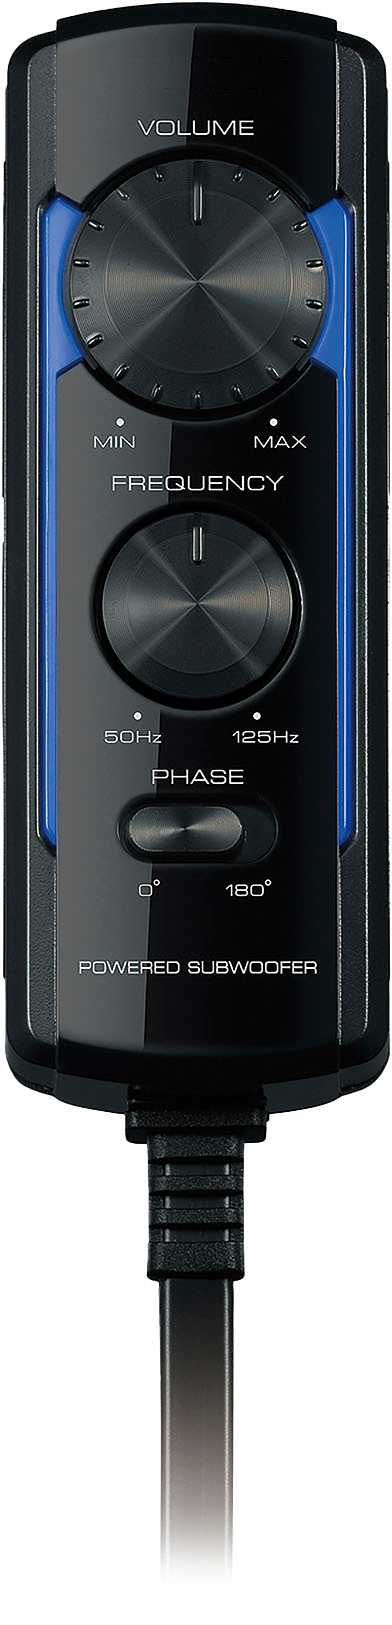 Back View: KENWOOD -Compact 8" Subwoofer with Enclosure and integrated 250W Amplifier - Black